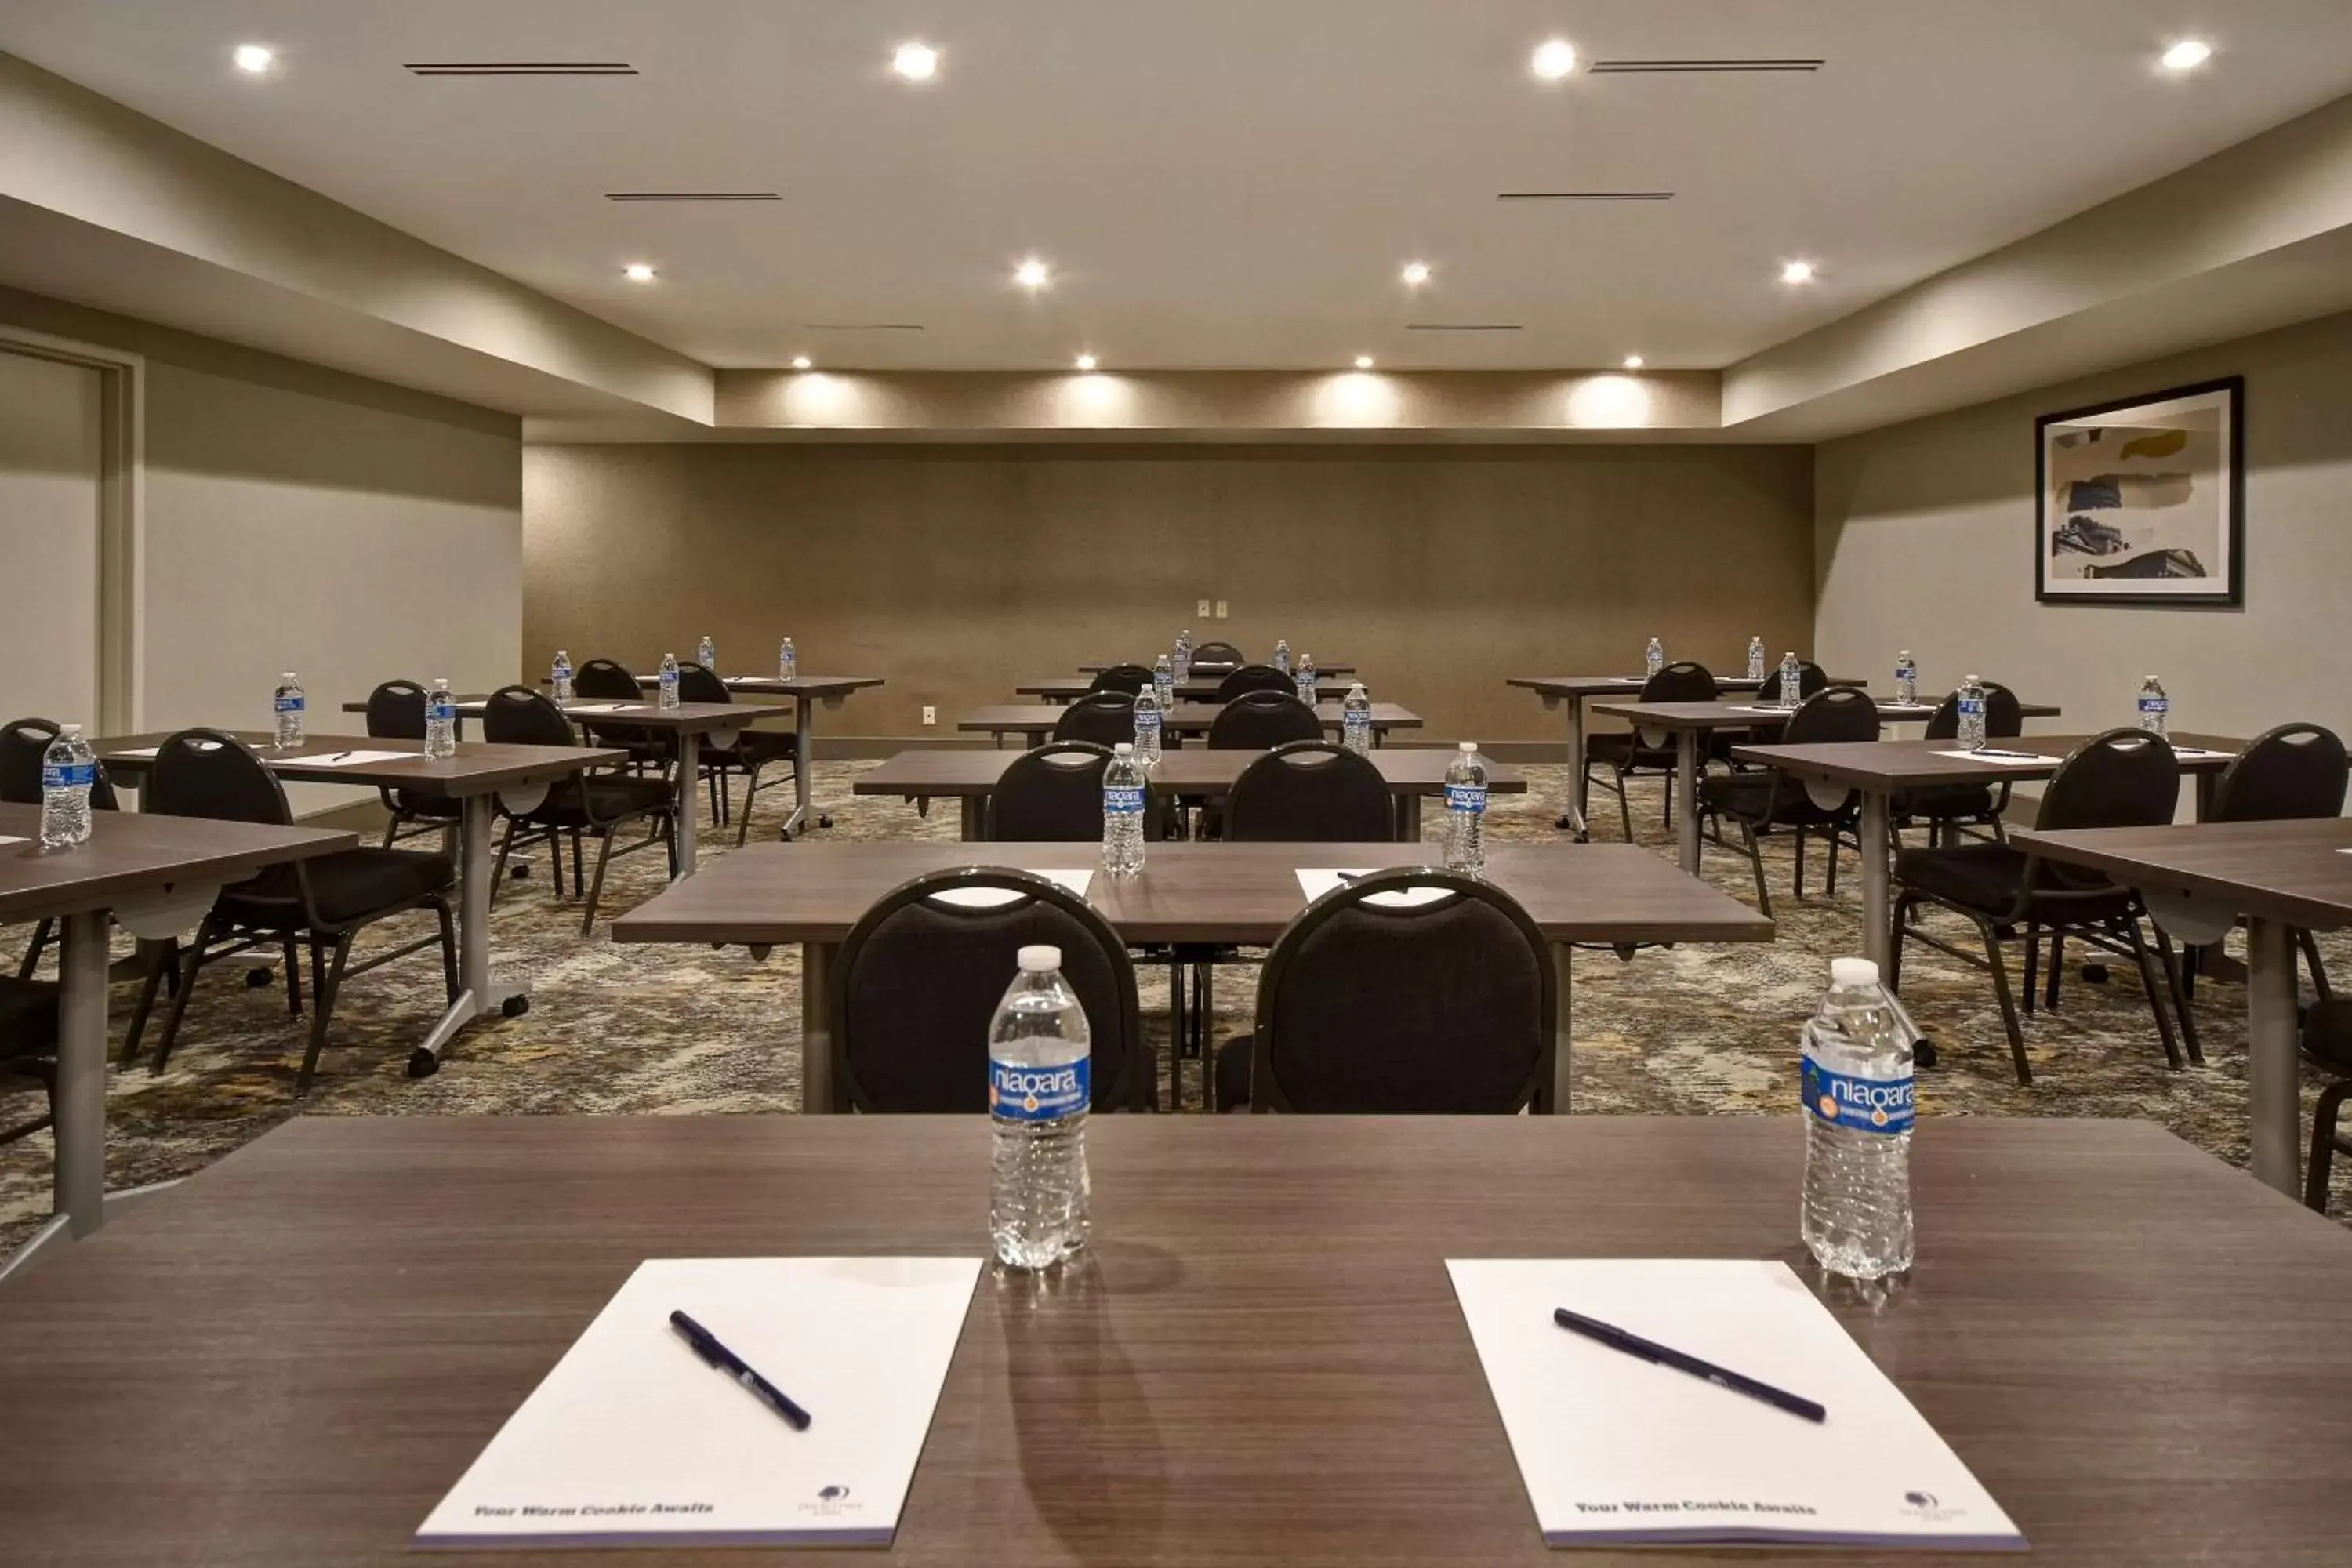 Meeting/conference room, Business Area/Conference Room in DoubleTree by Hilton St. Louis Airport, MO